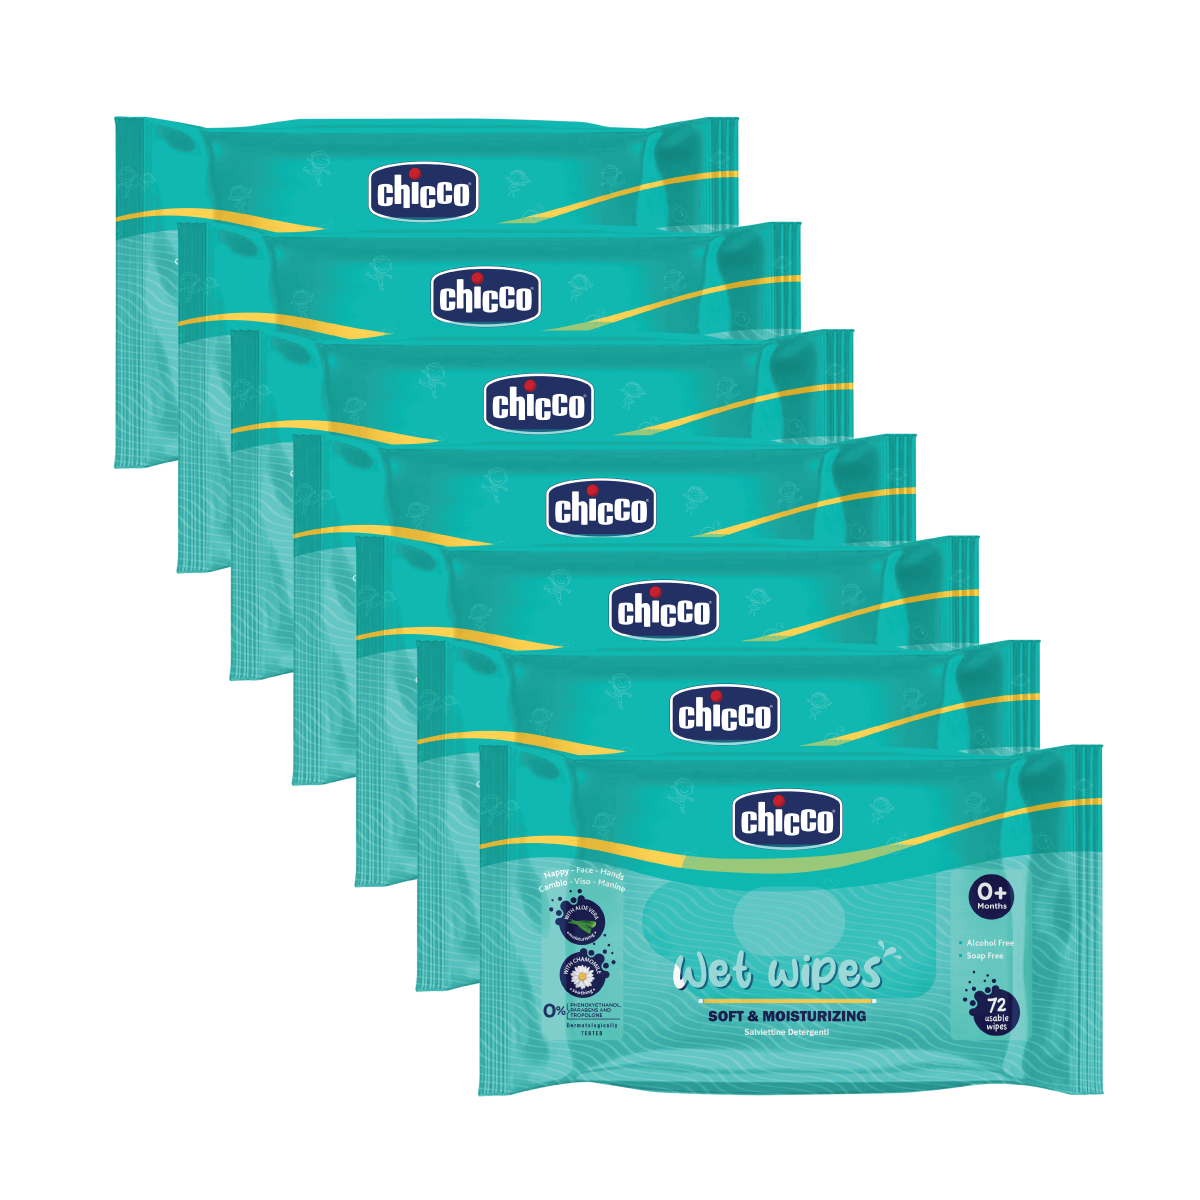 Chicco Wetwipes Pack of 8-504 PCS